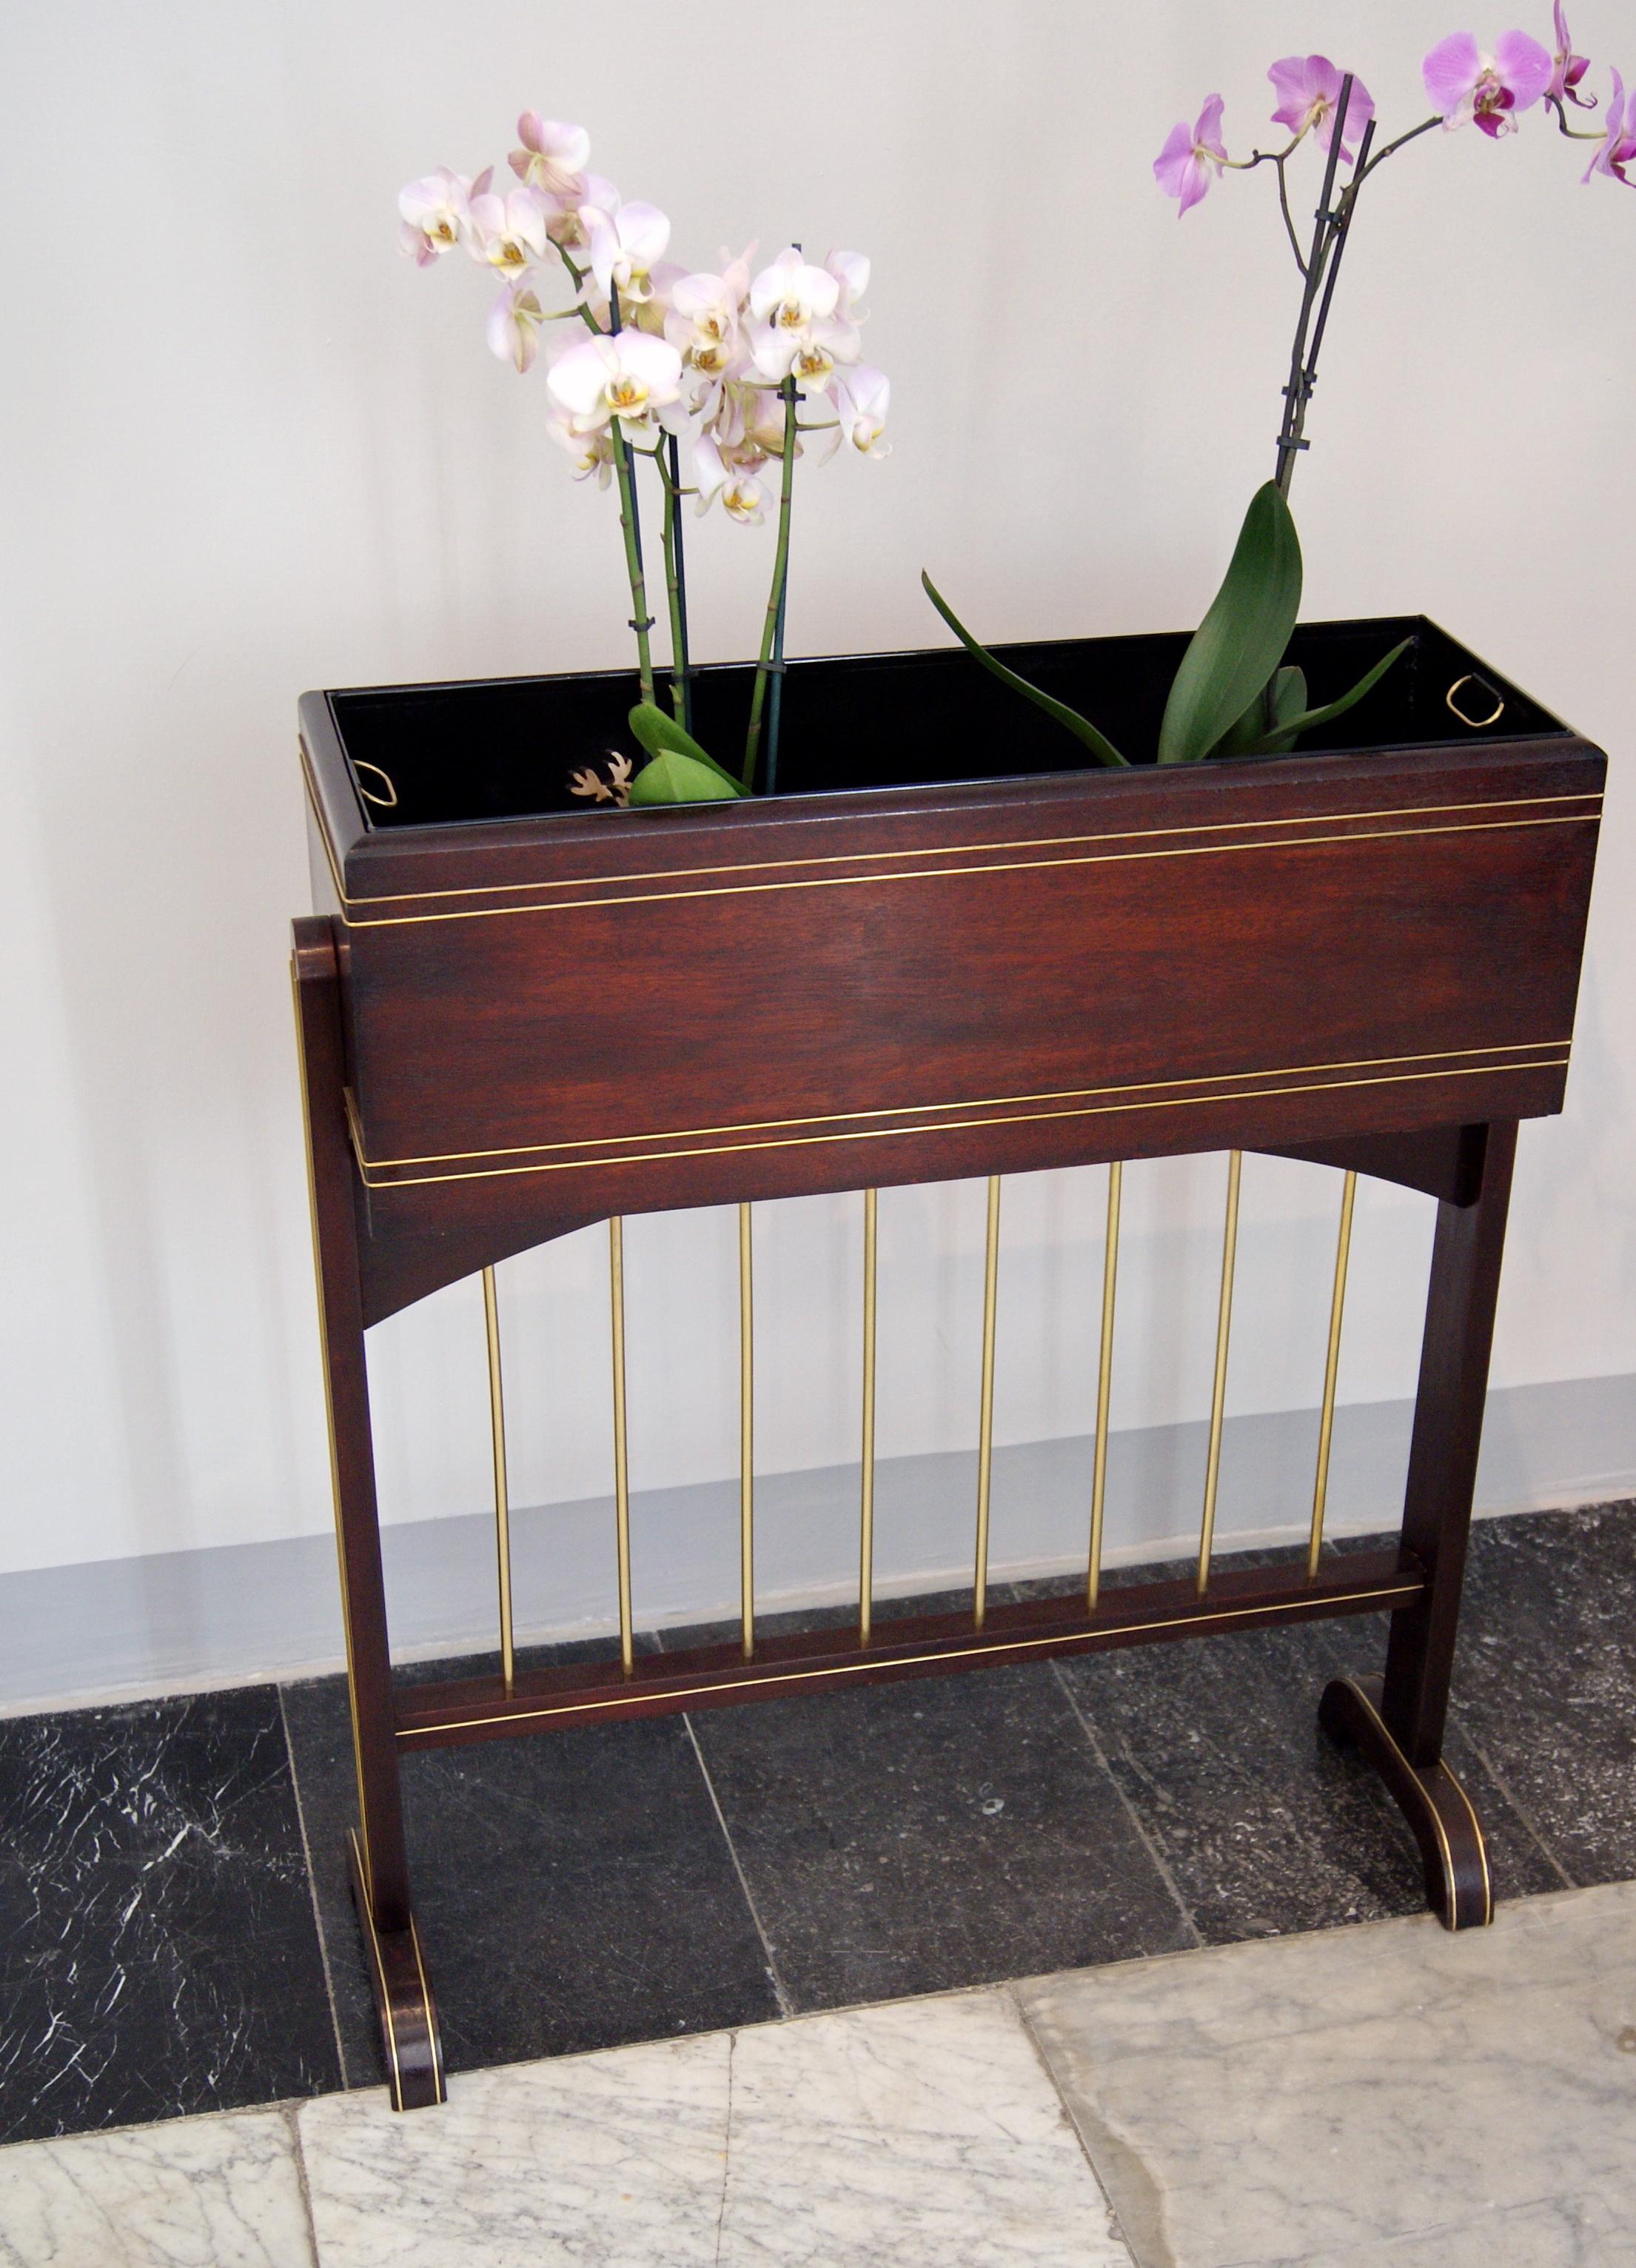 Beech Art Nouveau Flower Container Mahogany Stained Brass Inlays Vienna, circa 1915 For Sale